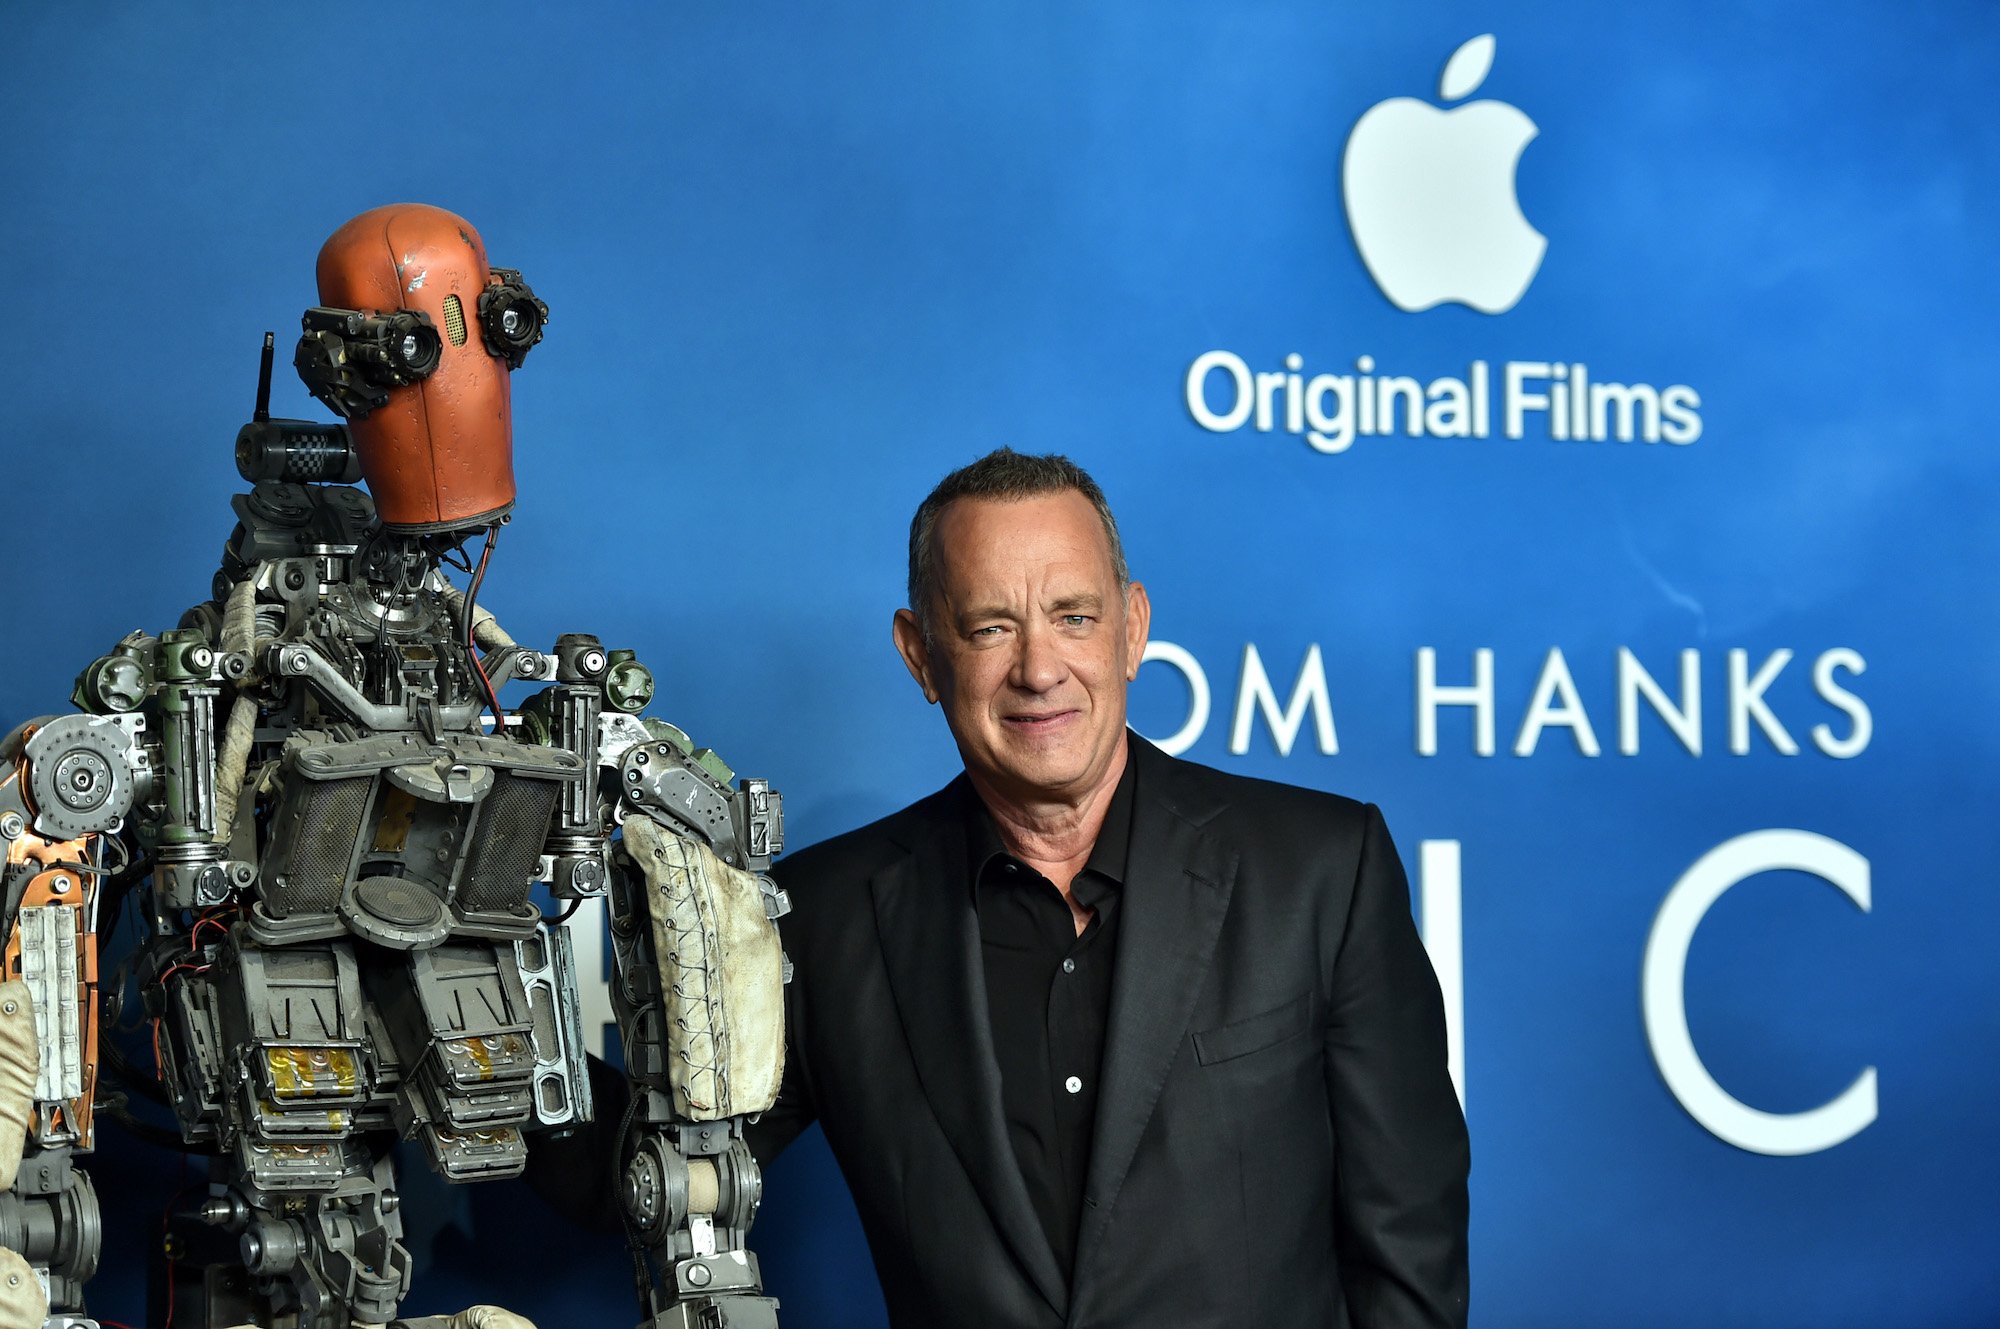 Tom Hanks streaming premiere of 'Finch': Hanks poses with robot